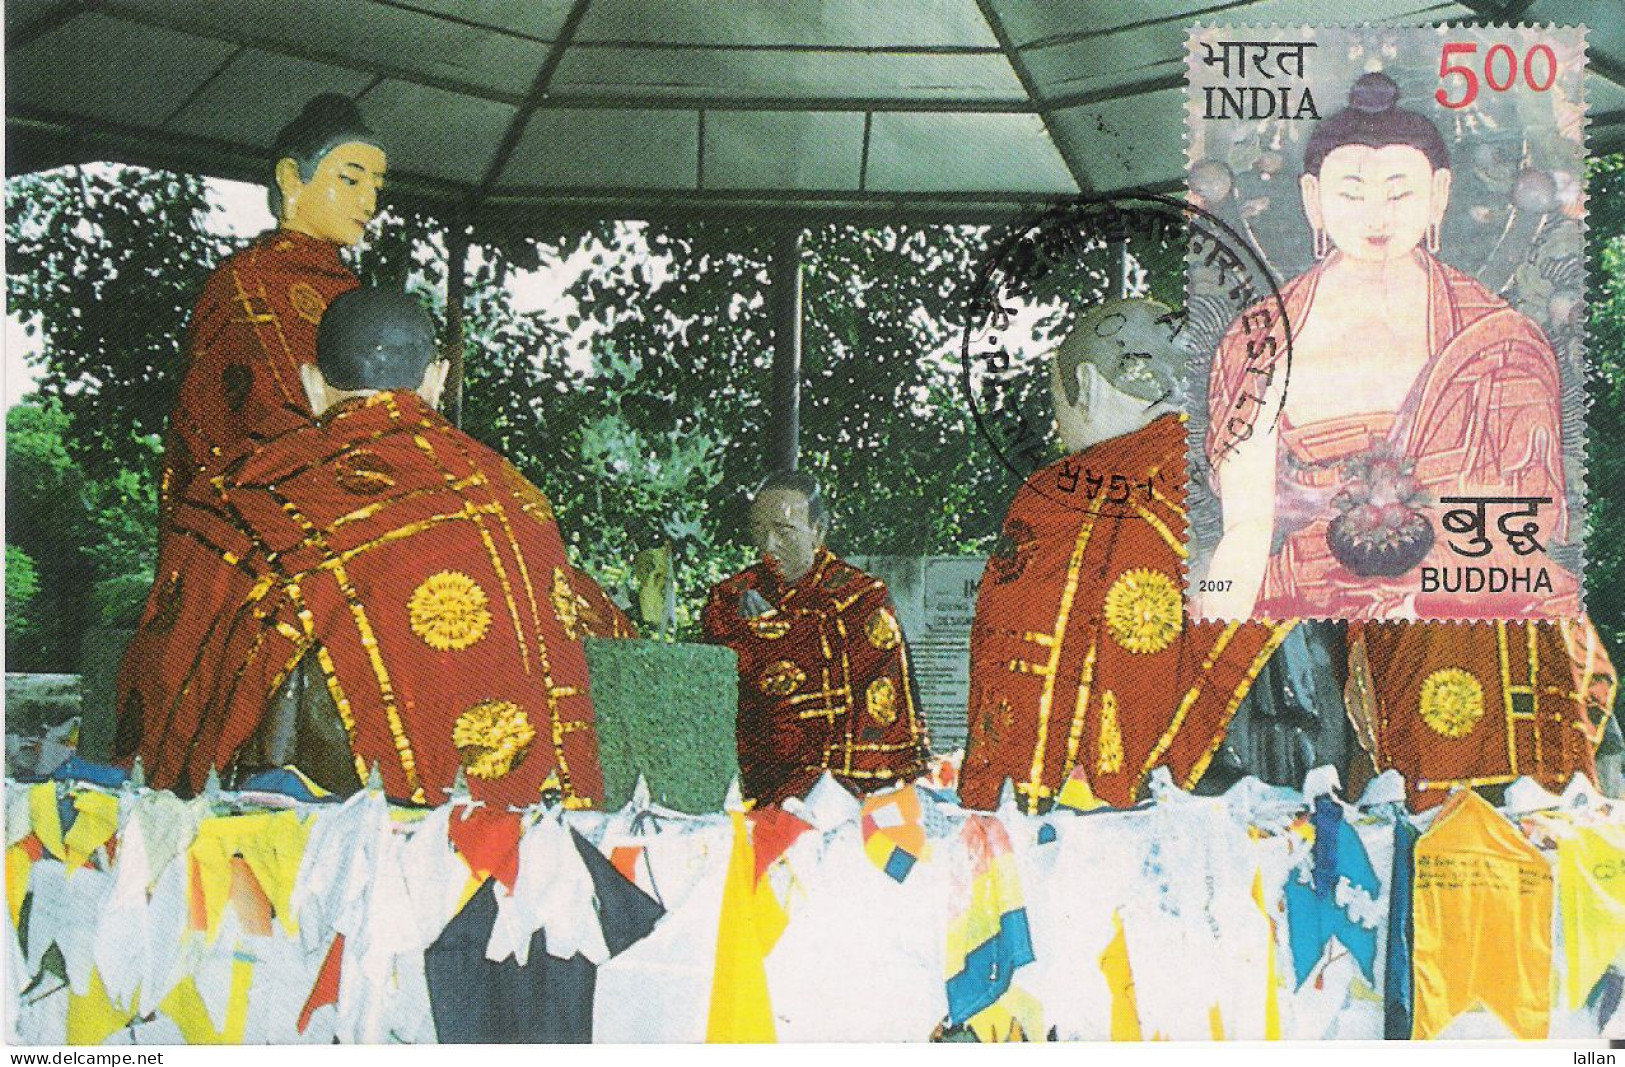 The Scene Of The Worship Of A Modern Image Of The Budha In Sarnath, Used Postcard With Matching Stamp 2011 - Buddhism